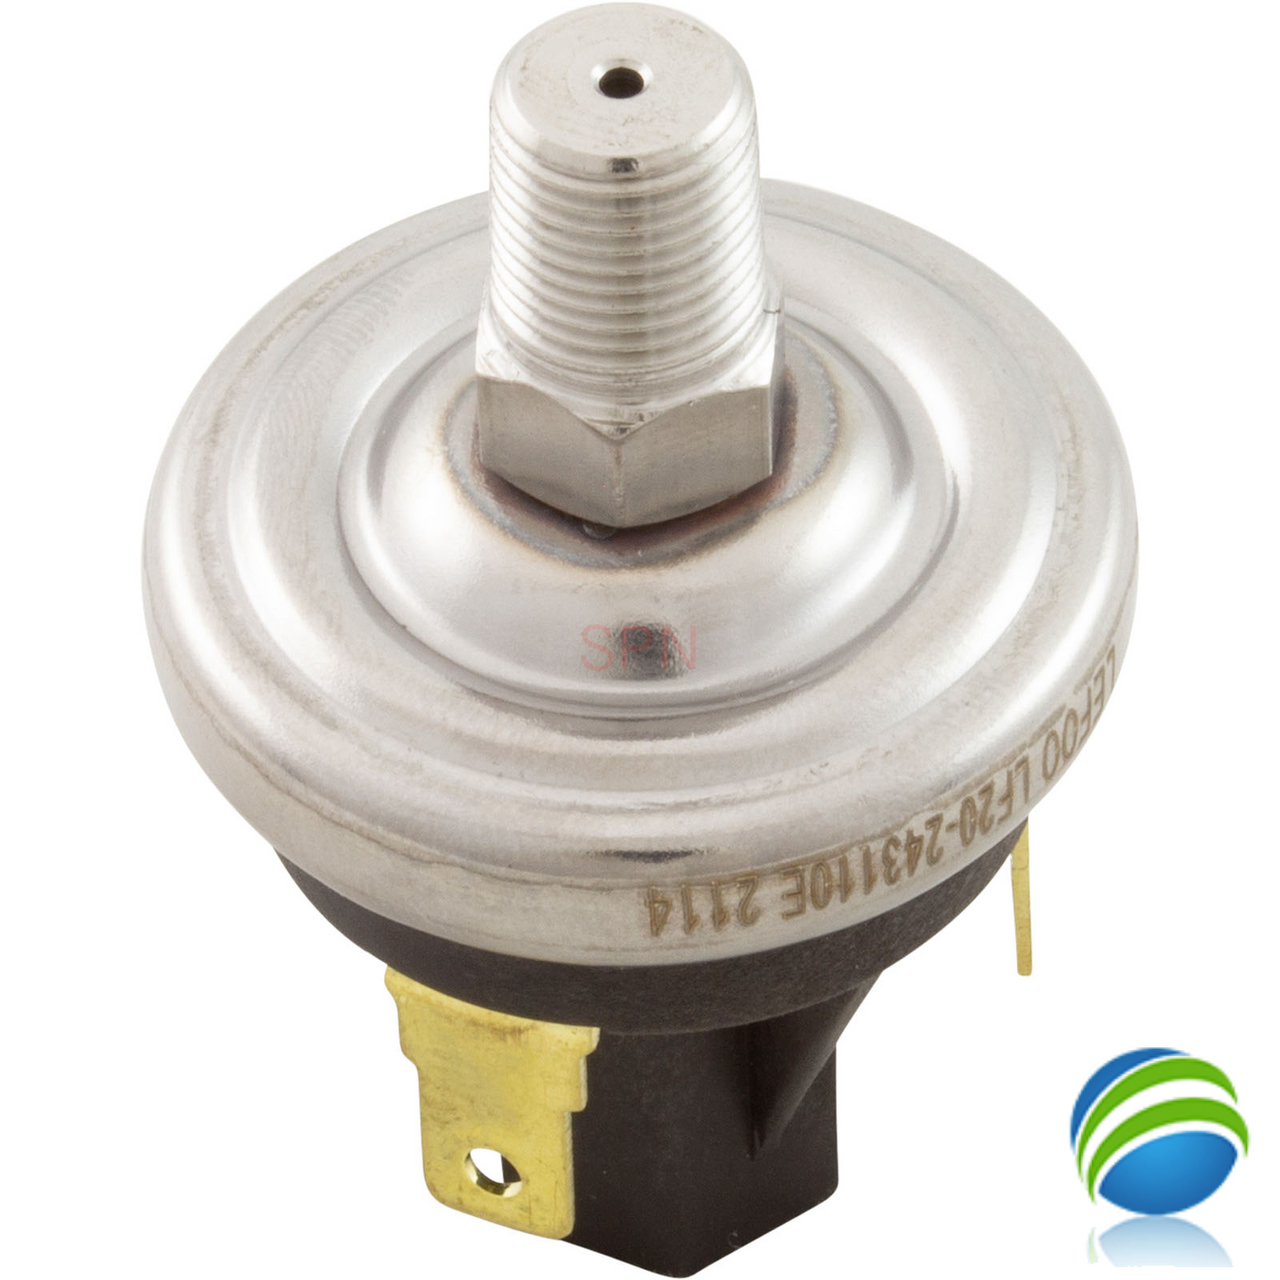 Universal DTEC Hot Tub and Spa Pressure Switch, Small, 1 Amp - Bottom Thread 1/8" MPT